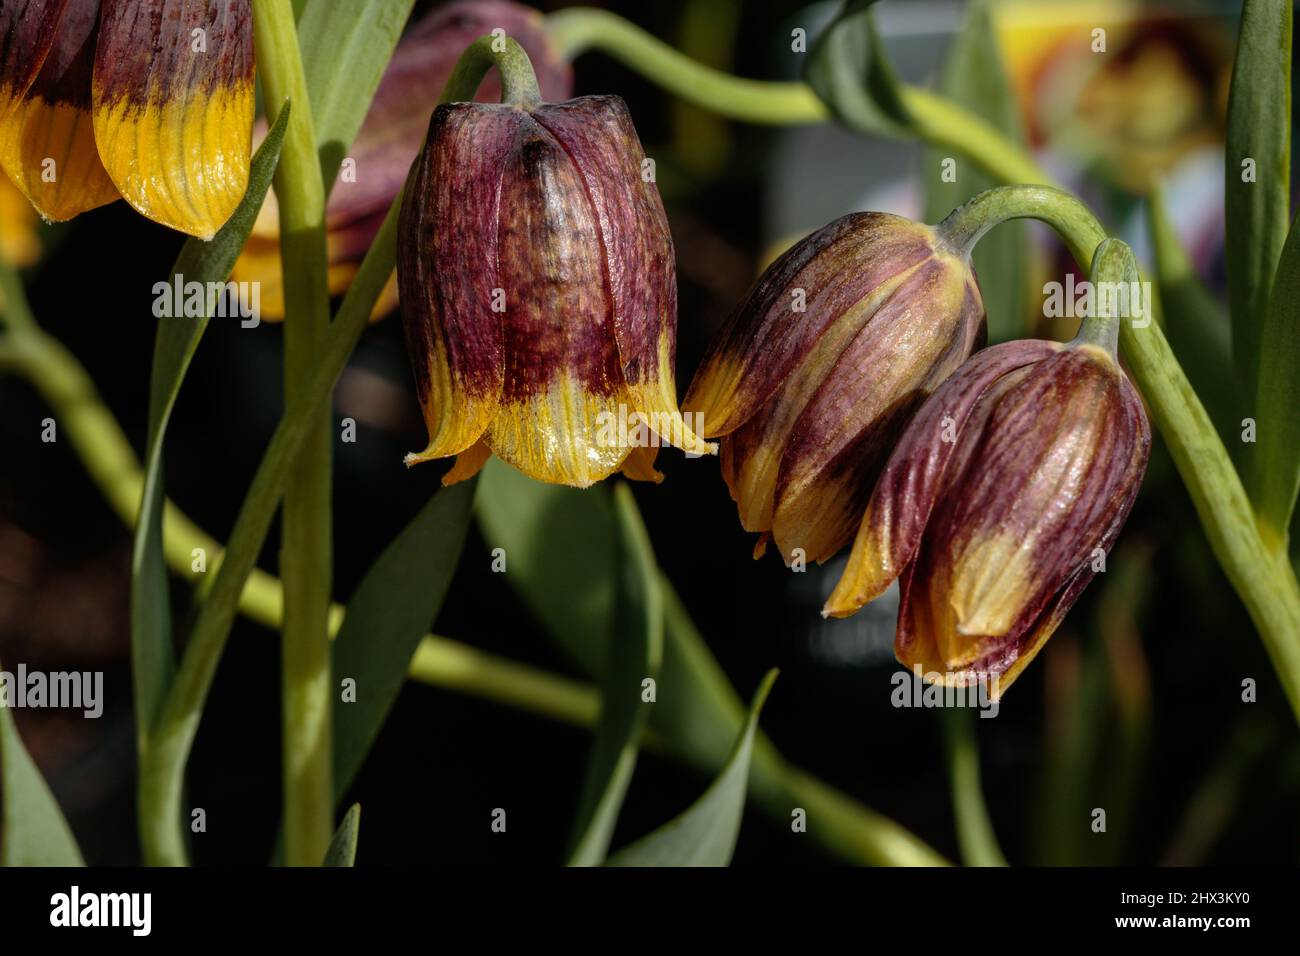 Fritillaria michailovskyi, a bell-shaped flower, has tepals that are a deep purplish brown and are tipped with yellow. Stock Photo